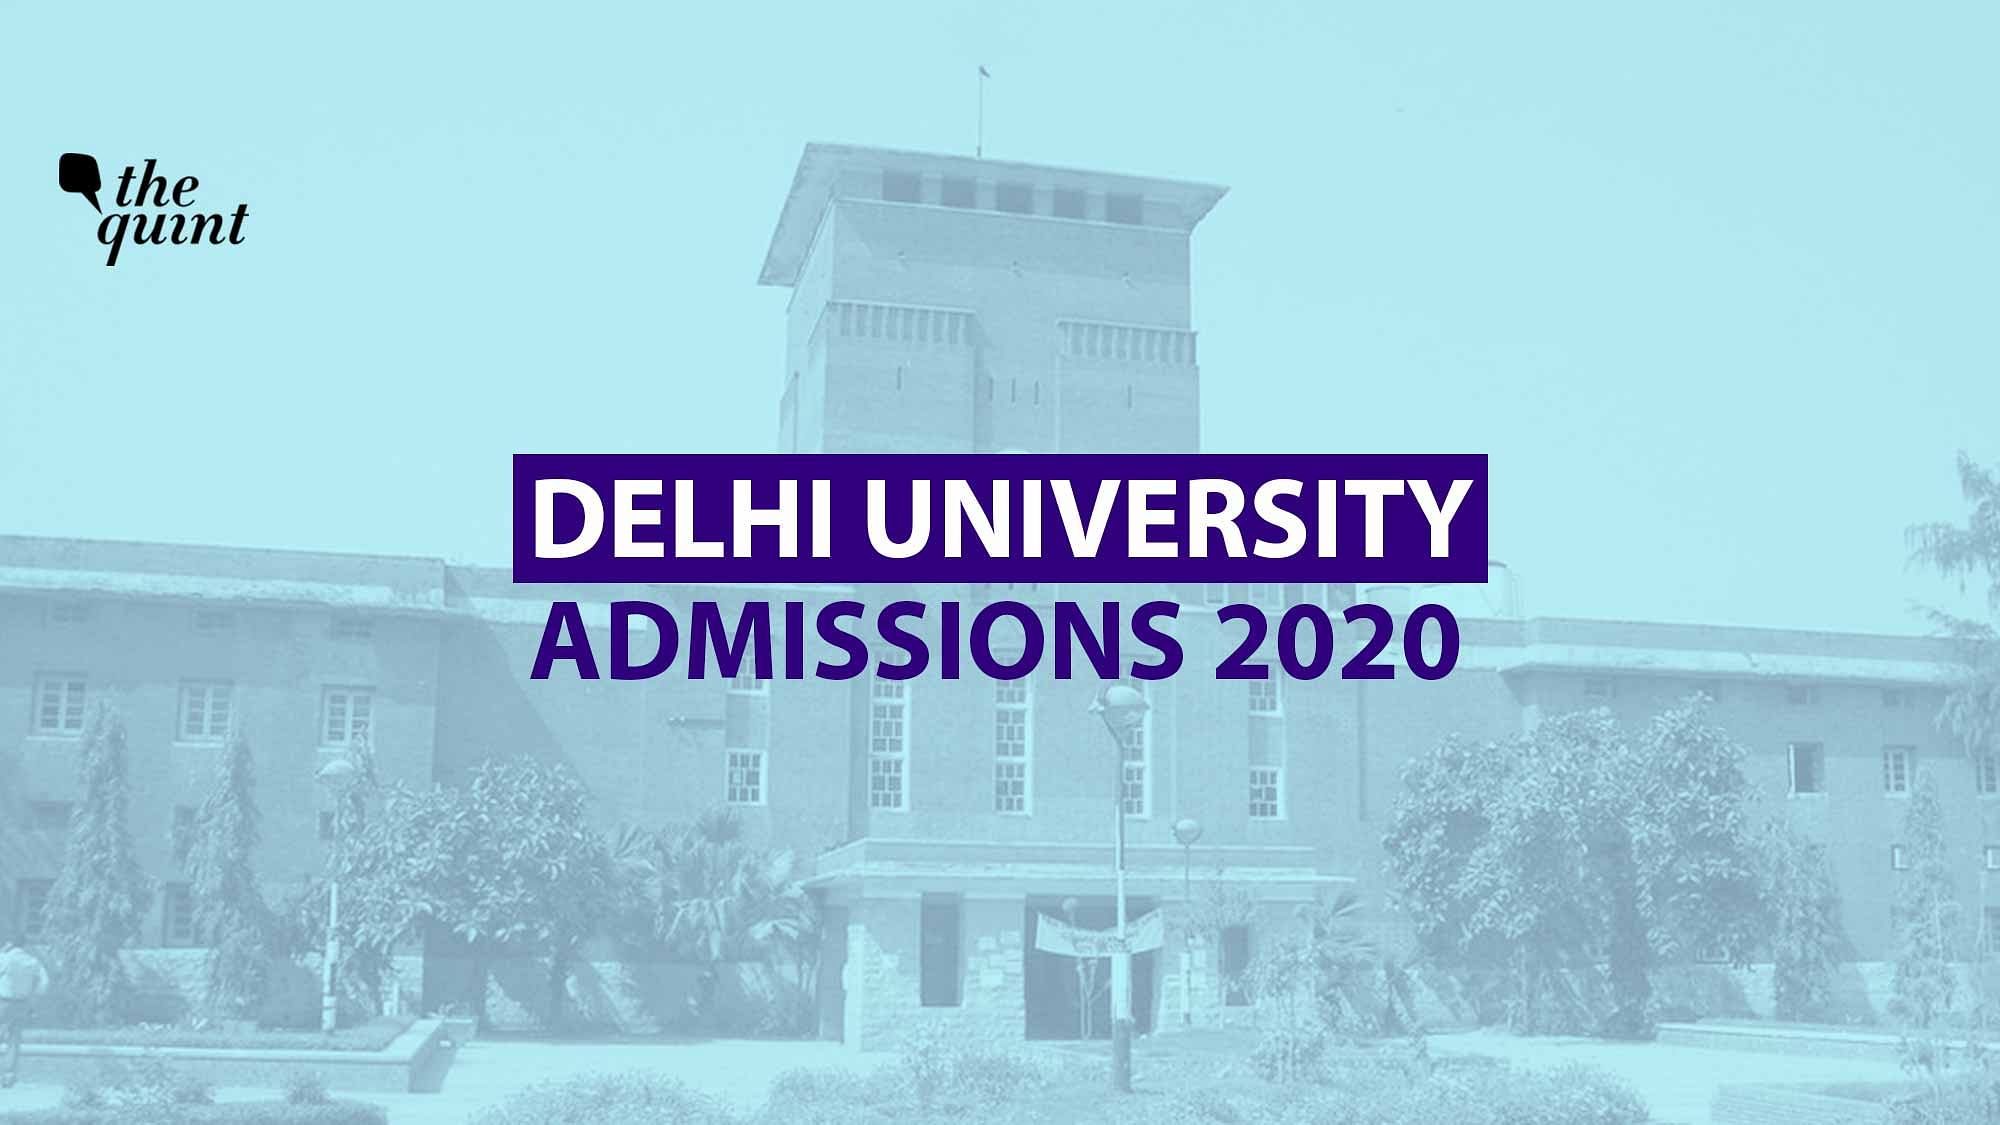 DU Admission 2020 Courses &amp; Fees: All you need to know about the Delhi University admissions for 2020.&nbsp;